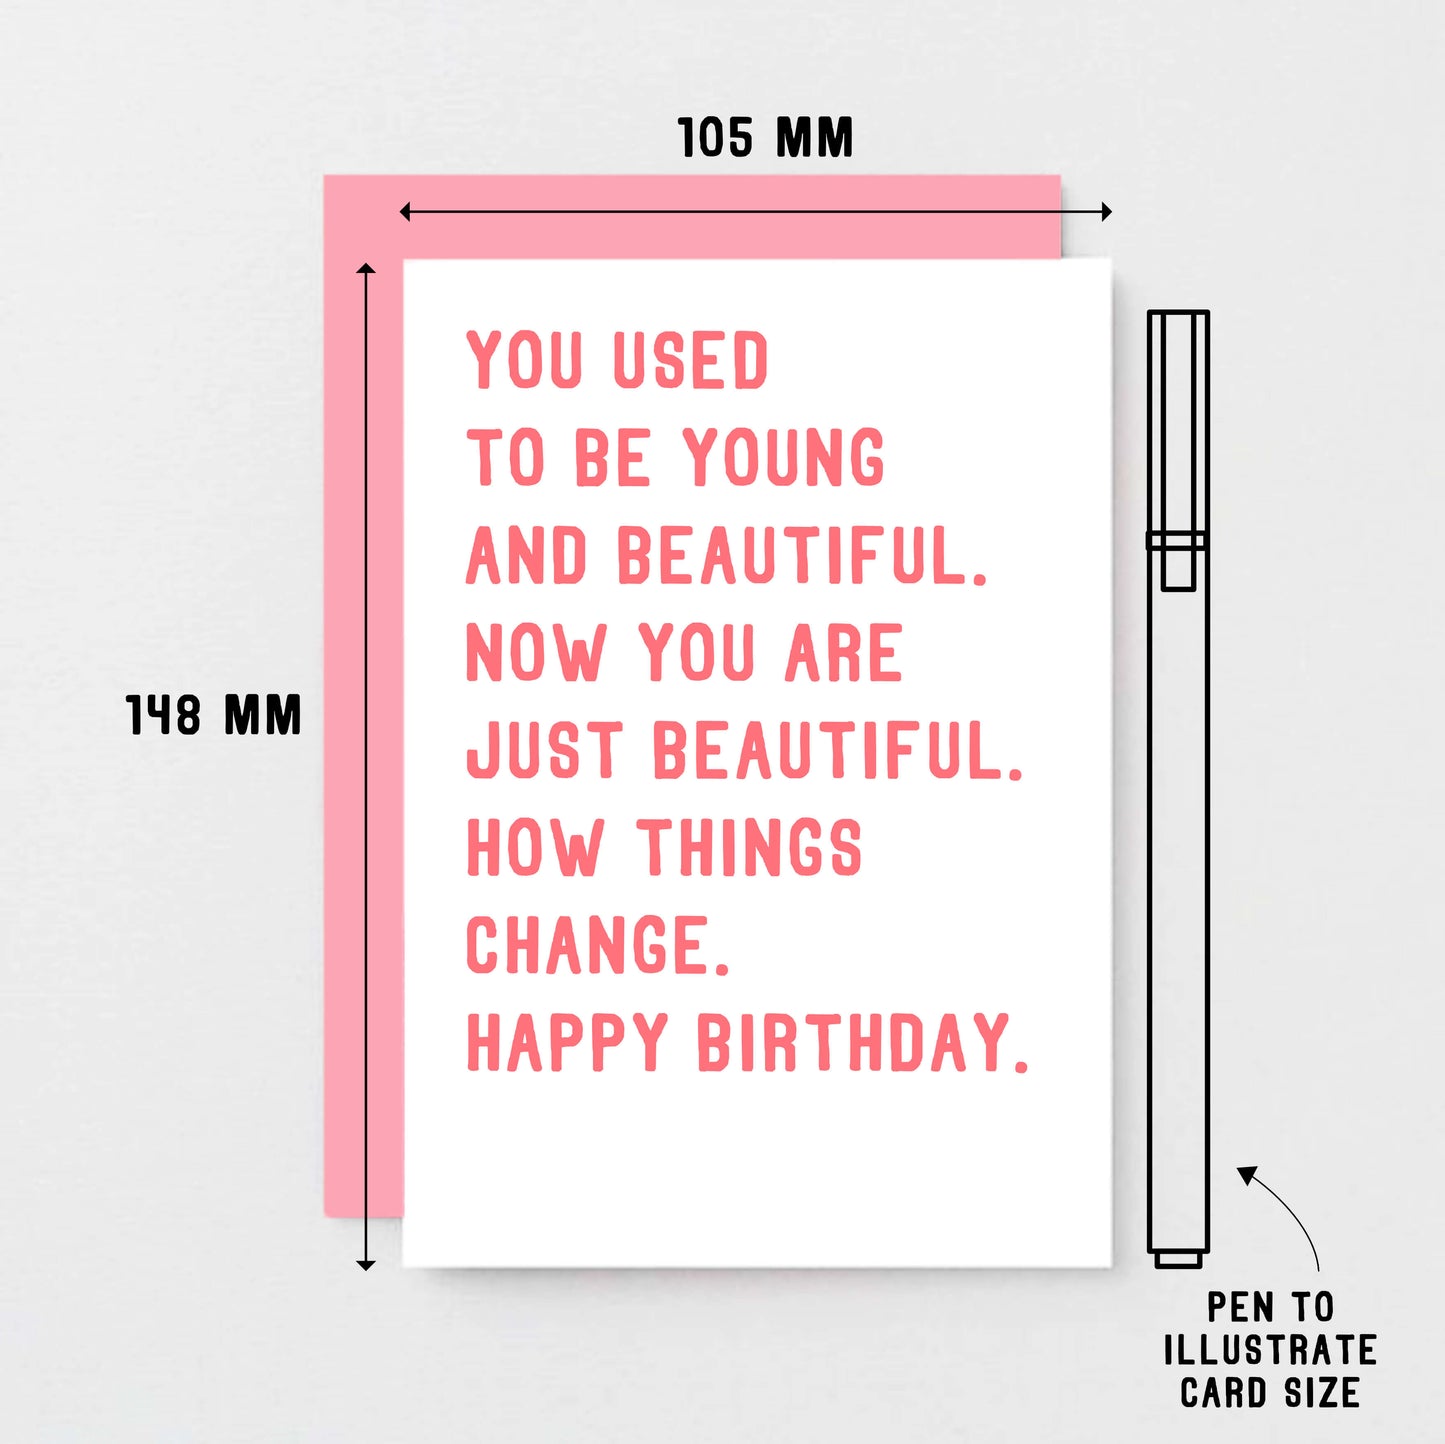 Birthday Card by SixElevenCreations. Reads You used to be young and beautiful. Now you are just beautiful. How things change. Happy birthday. Product Code SE2016A6